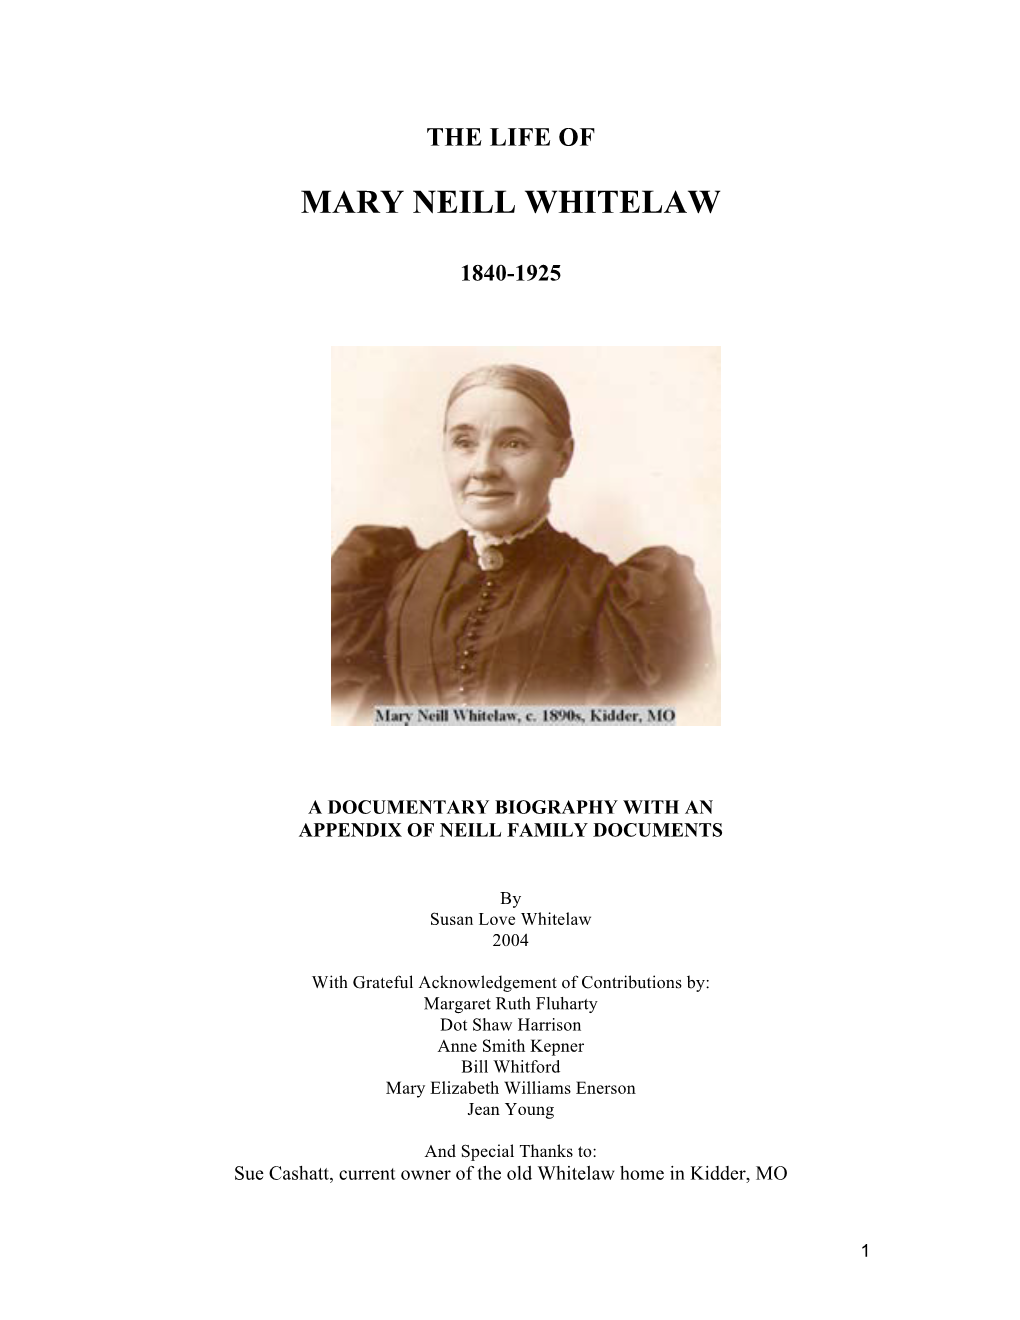 Mary Neill Whitelaw (1840-1925) Biography